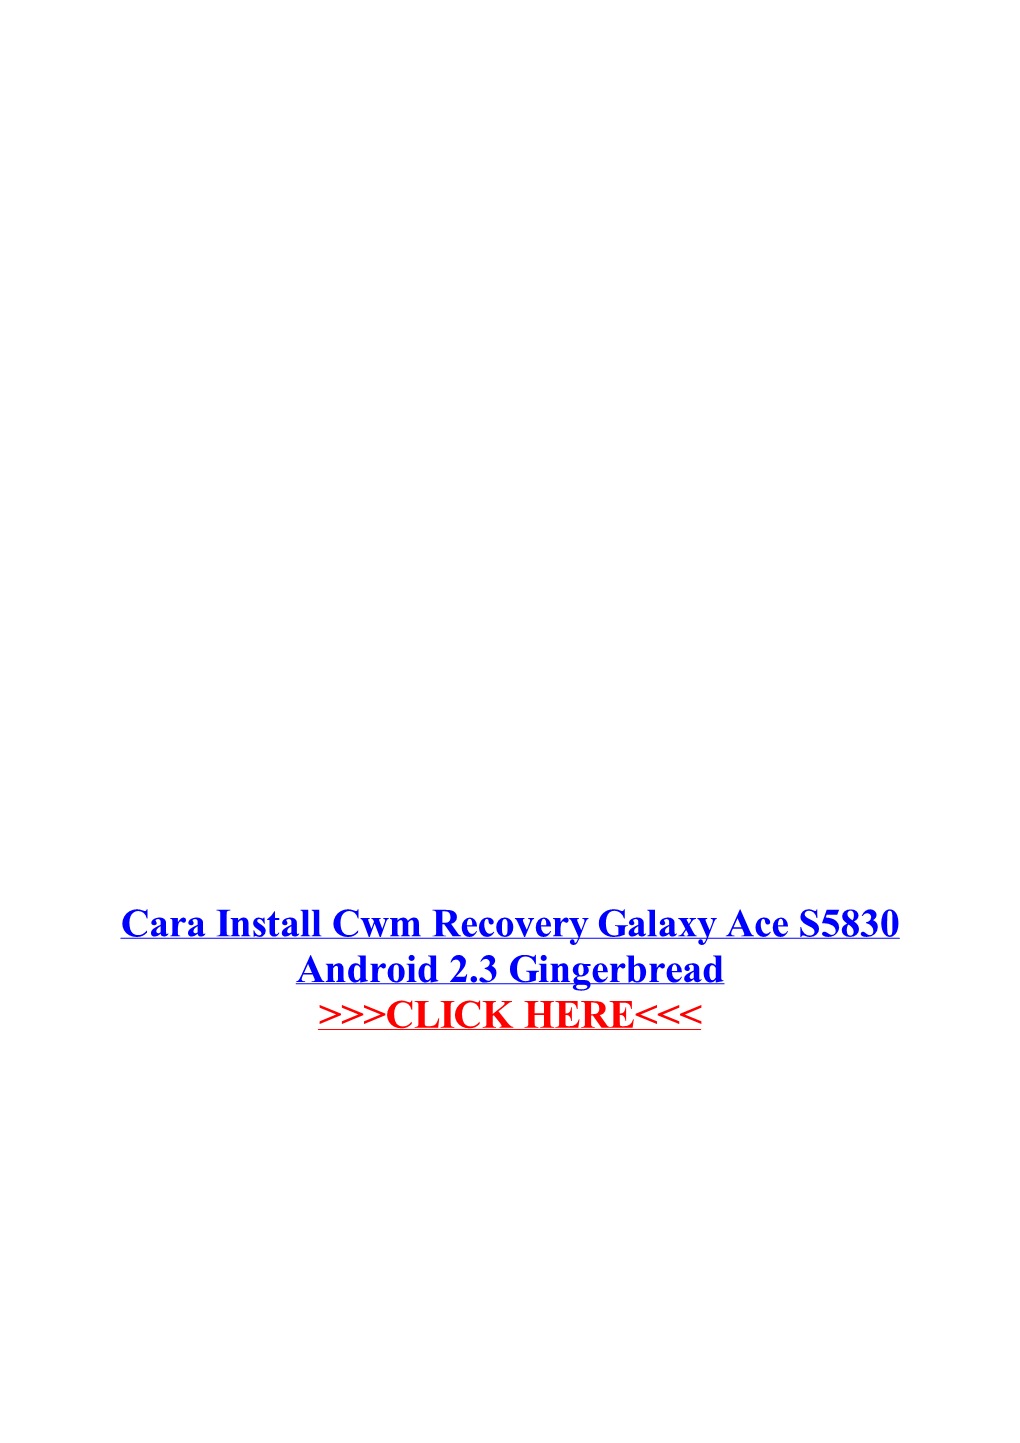 Cara Install Cwm Recovery Galaxy Ace S5830 Android 2.3 Gingerbread